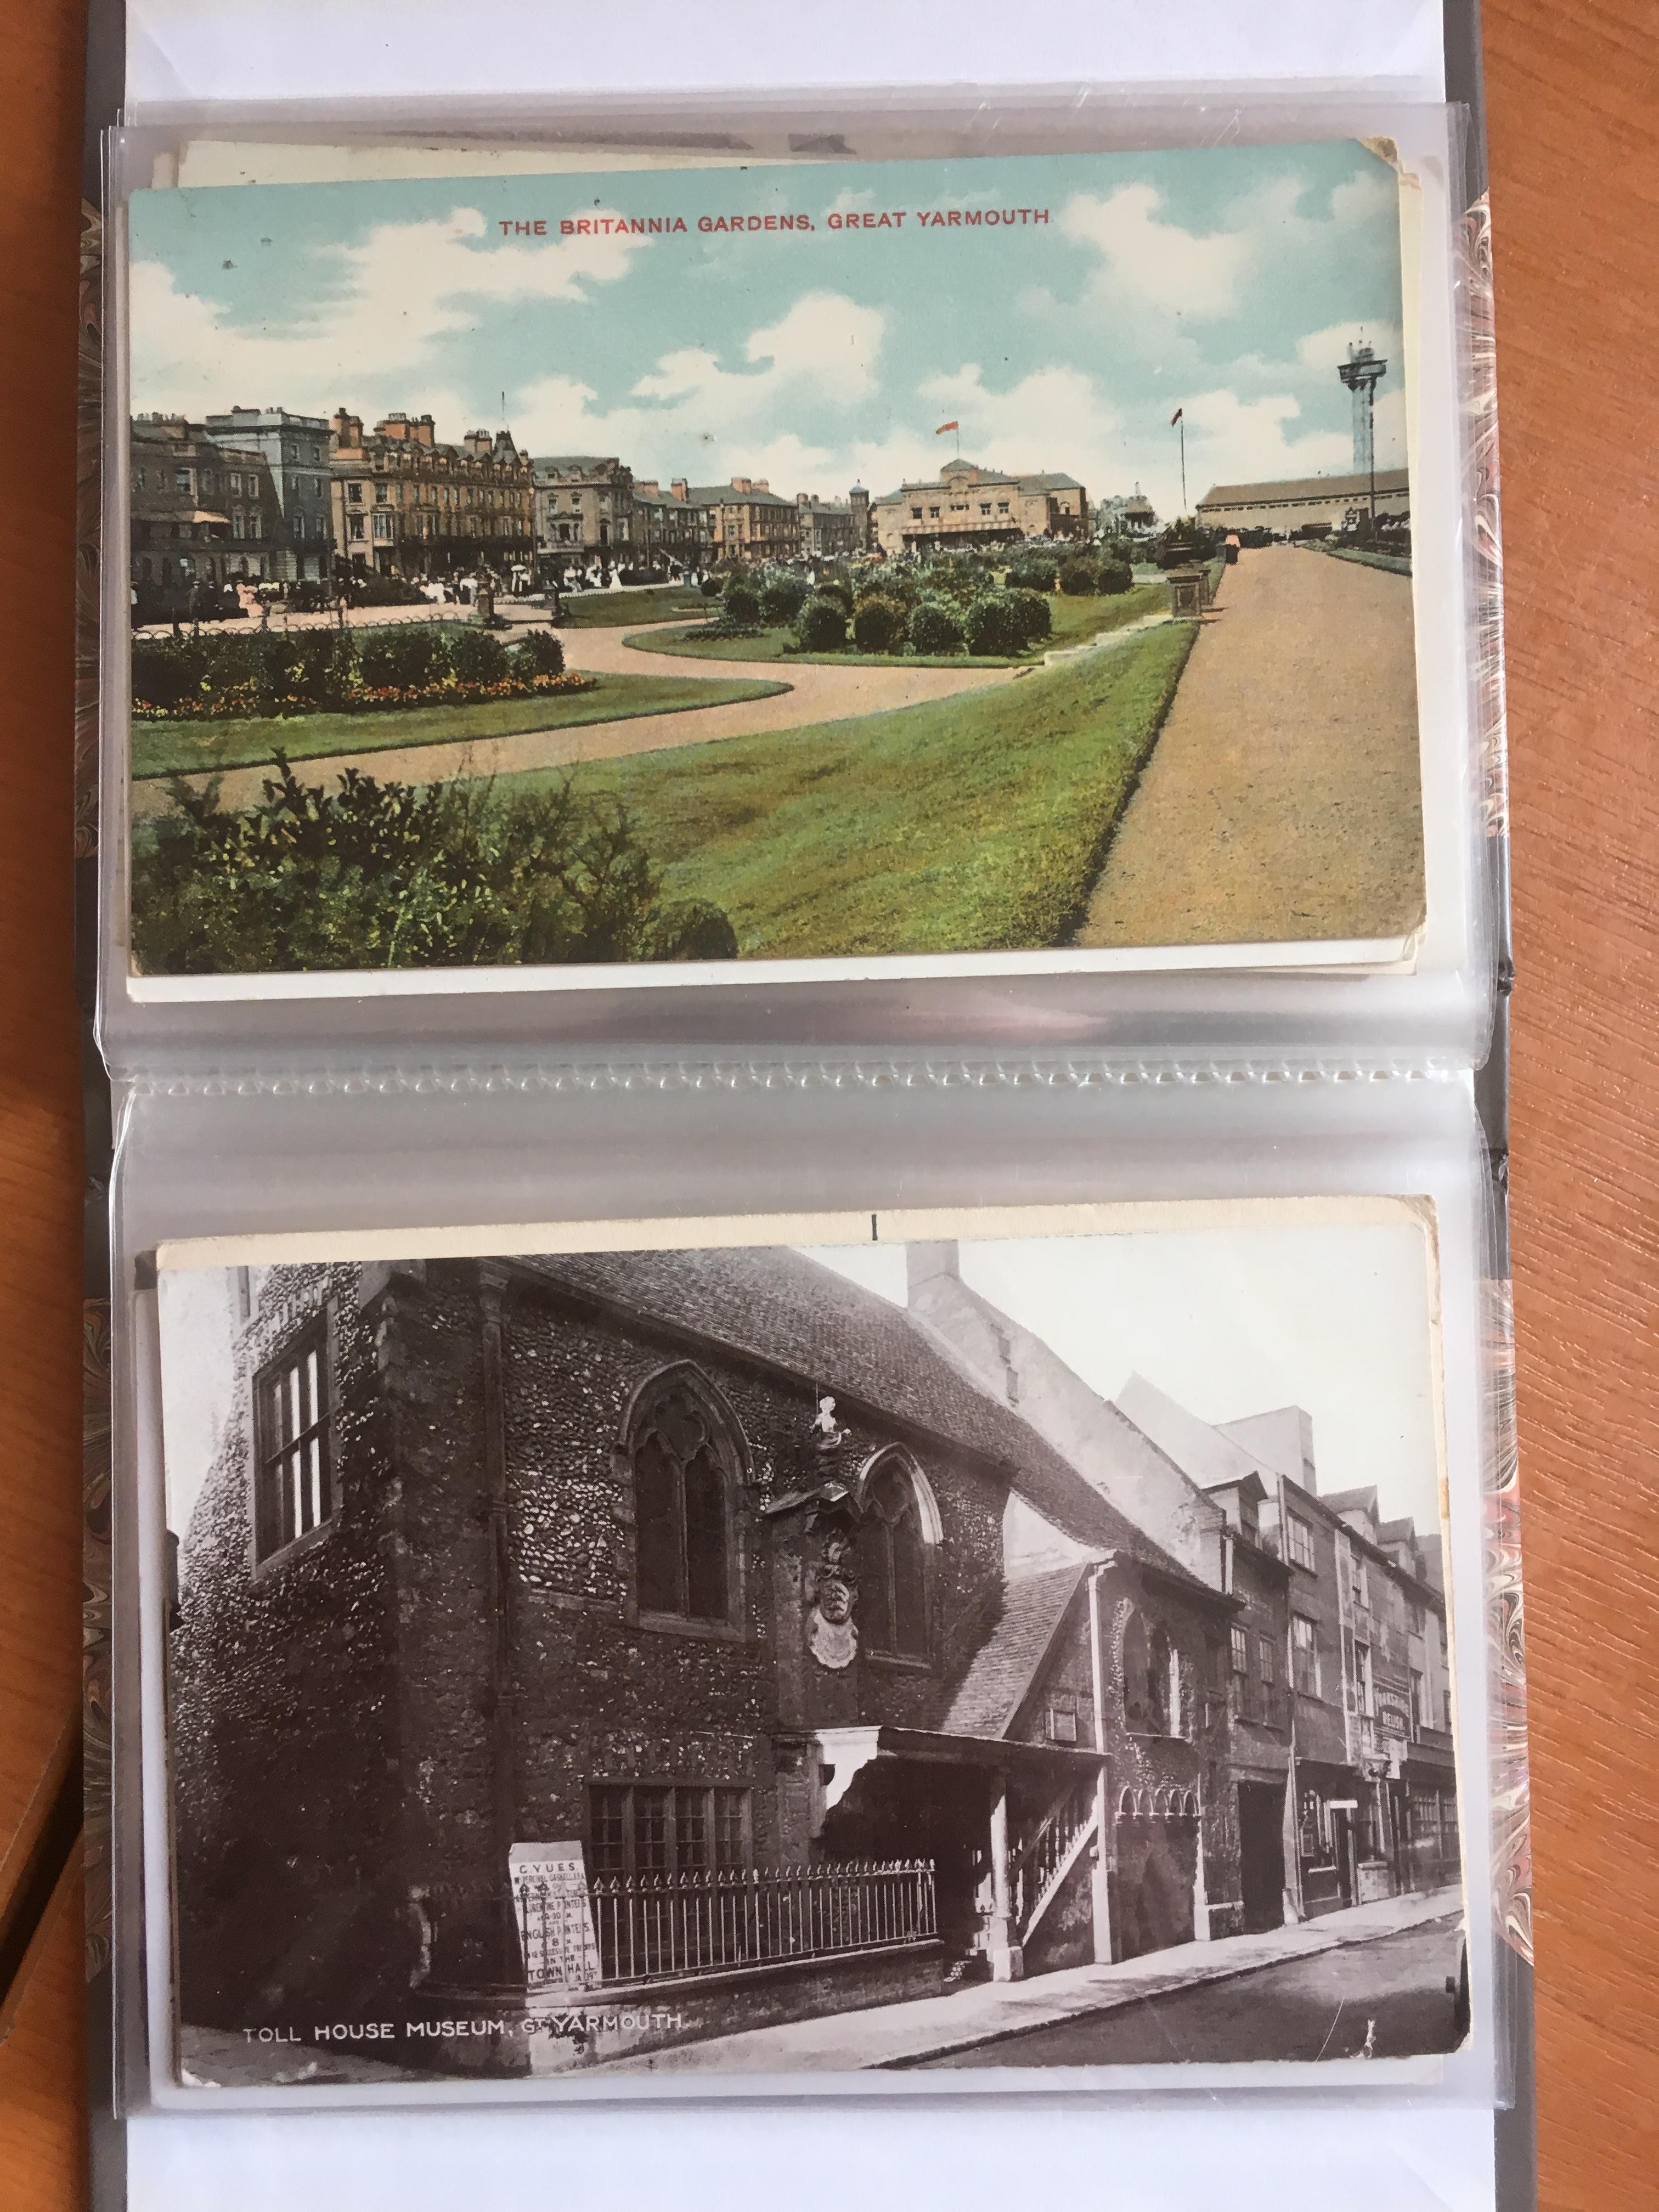 VICTORIAN PHOTOGRAPH ALBUM WITH MAINLY GREAT YARMOUTH AREA IMAGES TOGETHER WITH A SMALL ALBUM OF